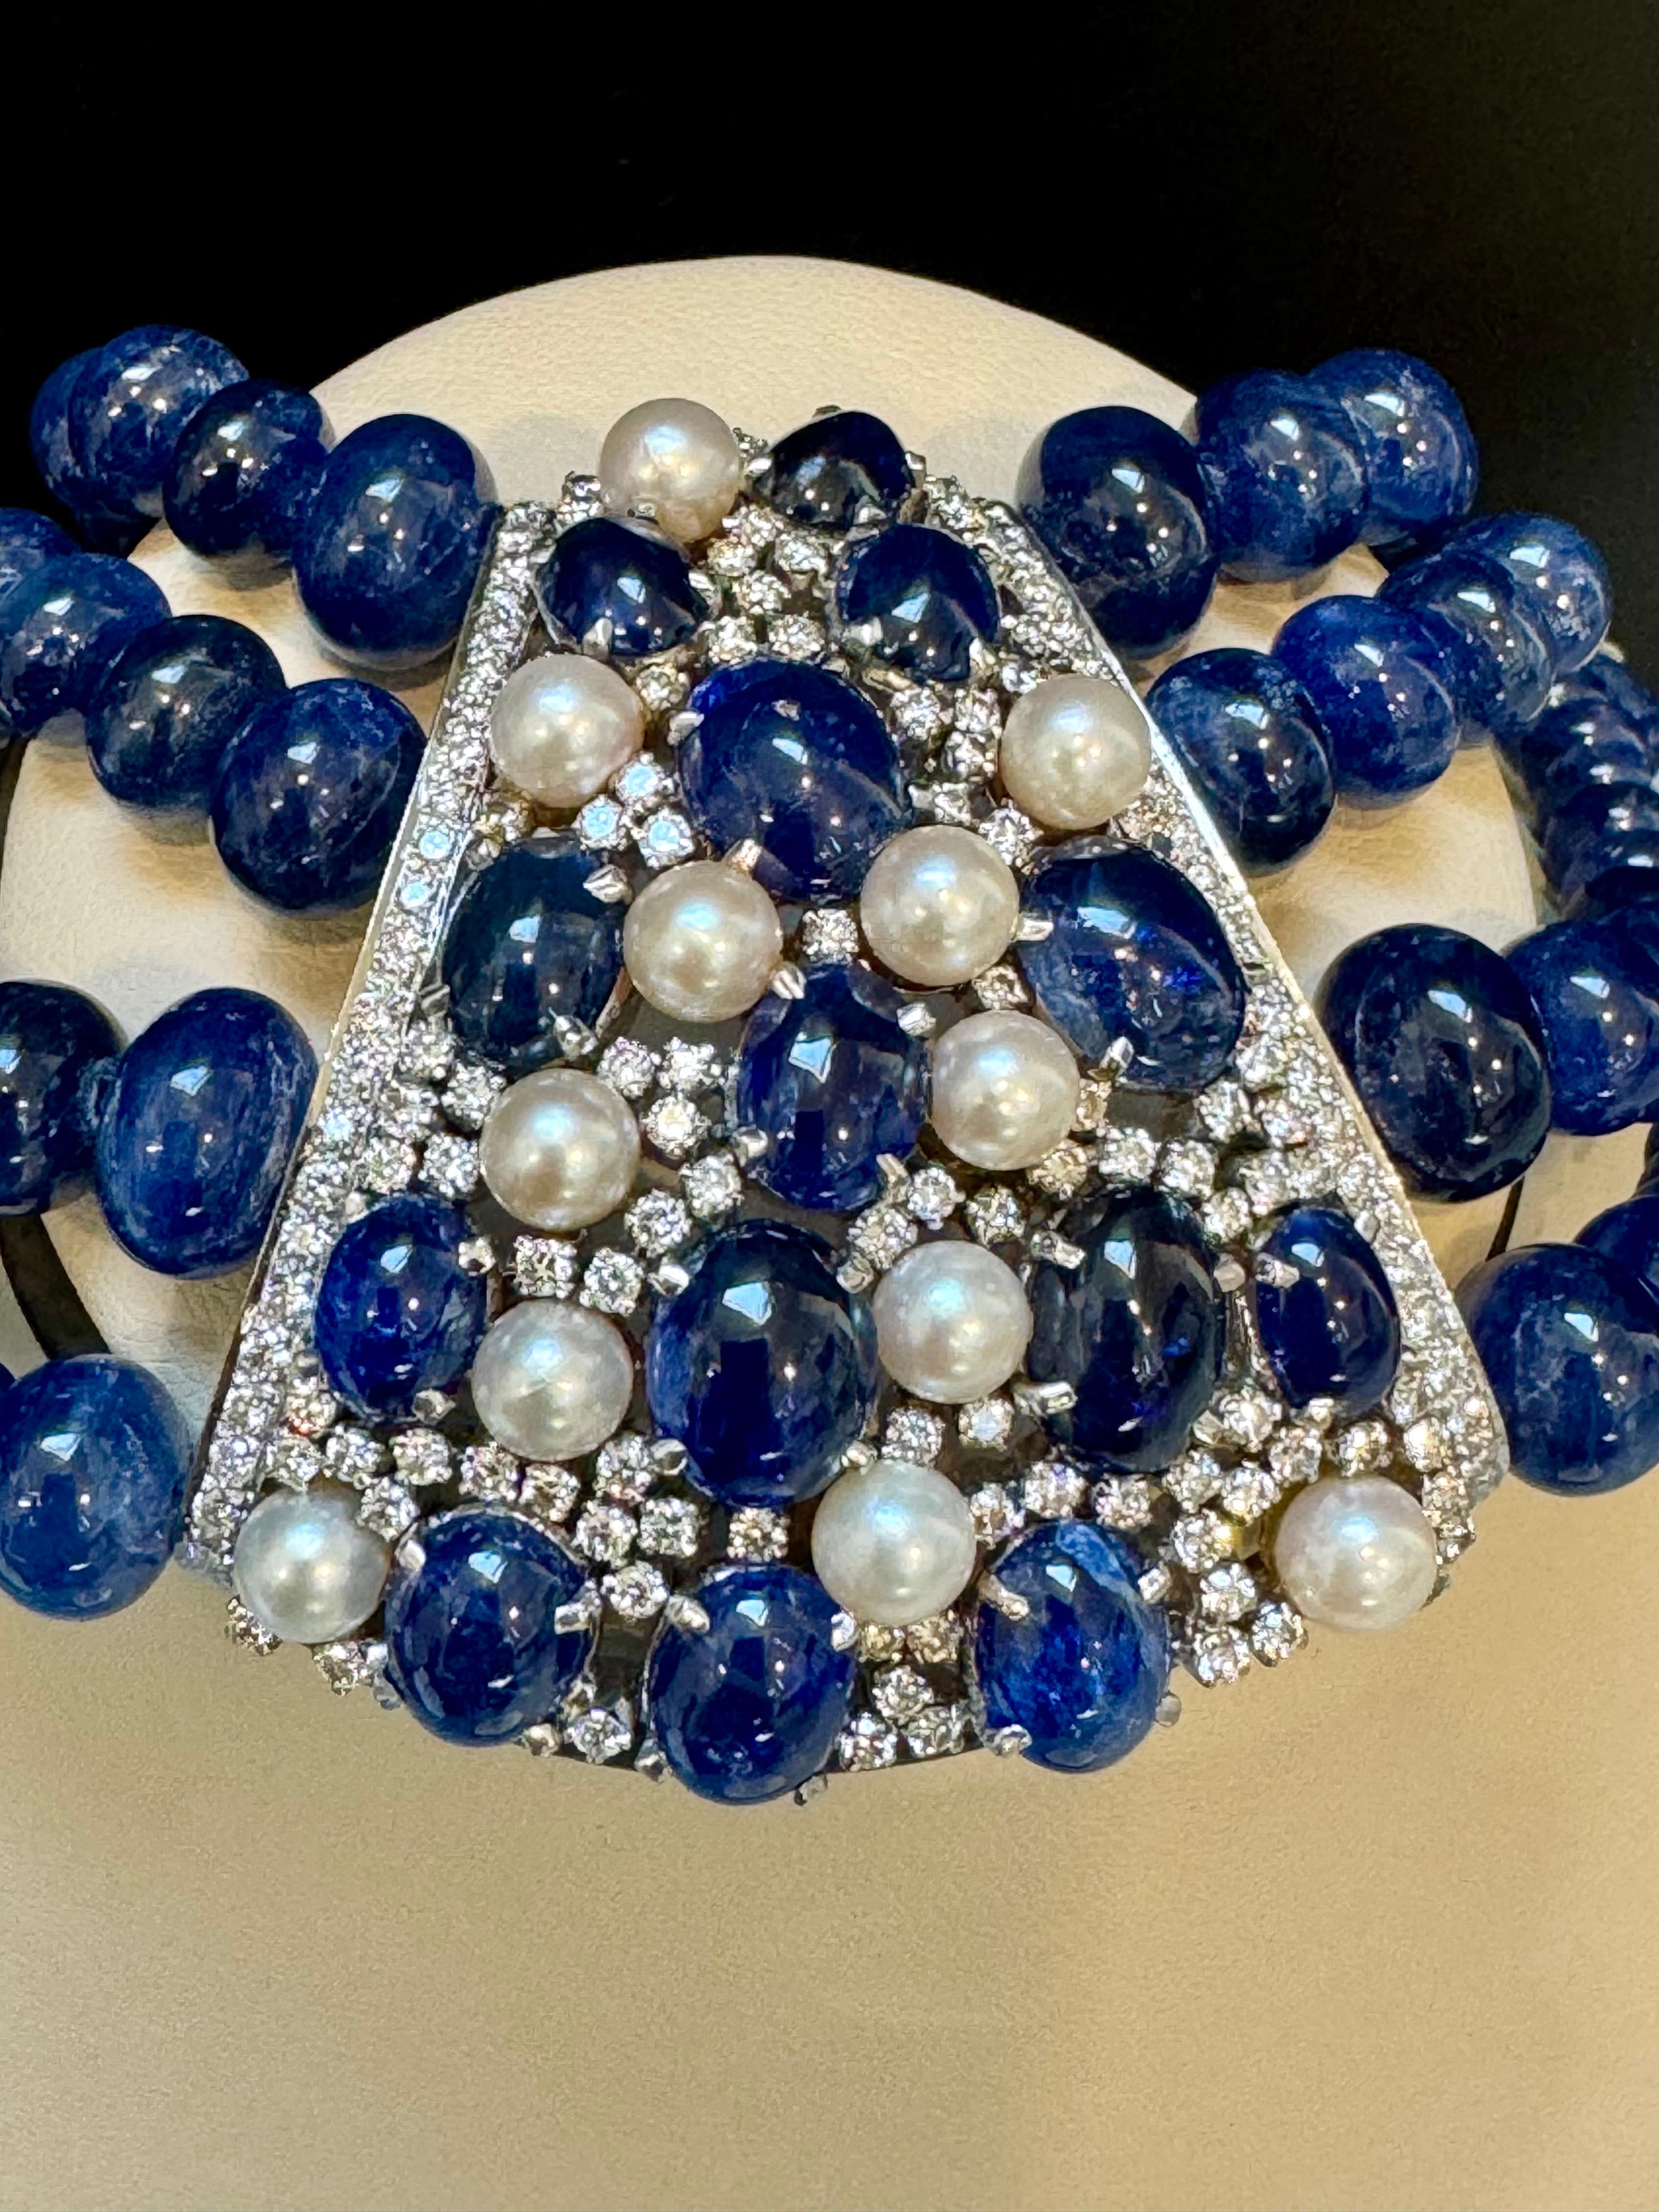 700 Ct Sapphire Bead Necklace with Sapphire cabochon & Diamond Center & Diamond Spacer in 18Karat white gold
This exquisite 18